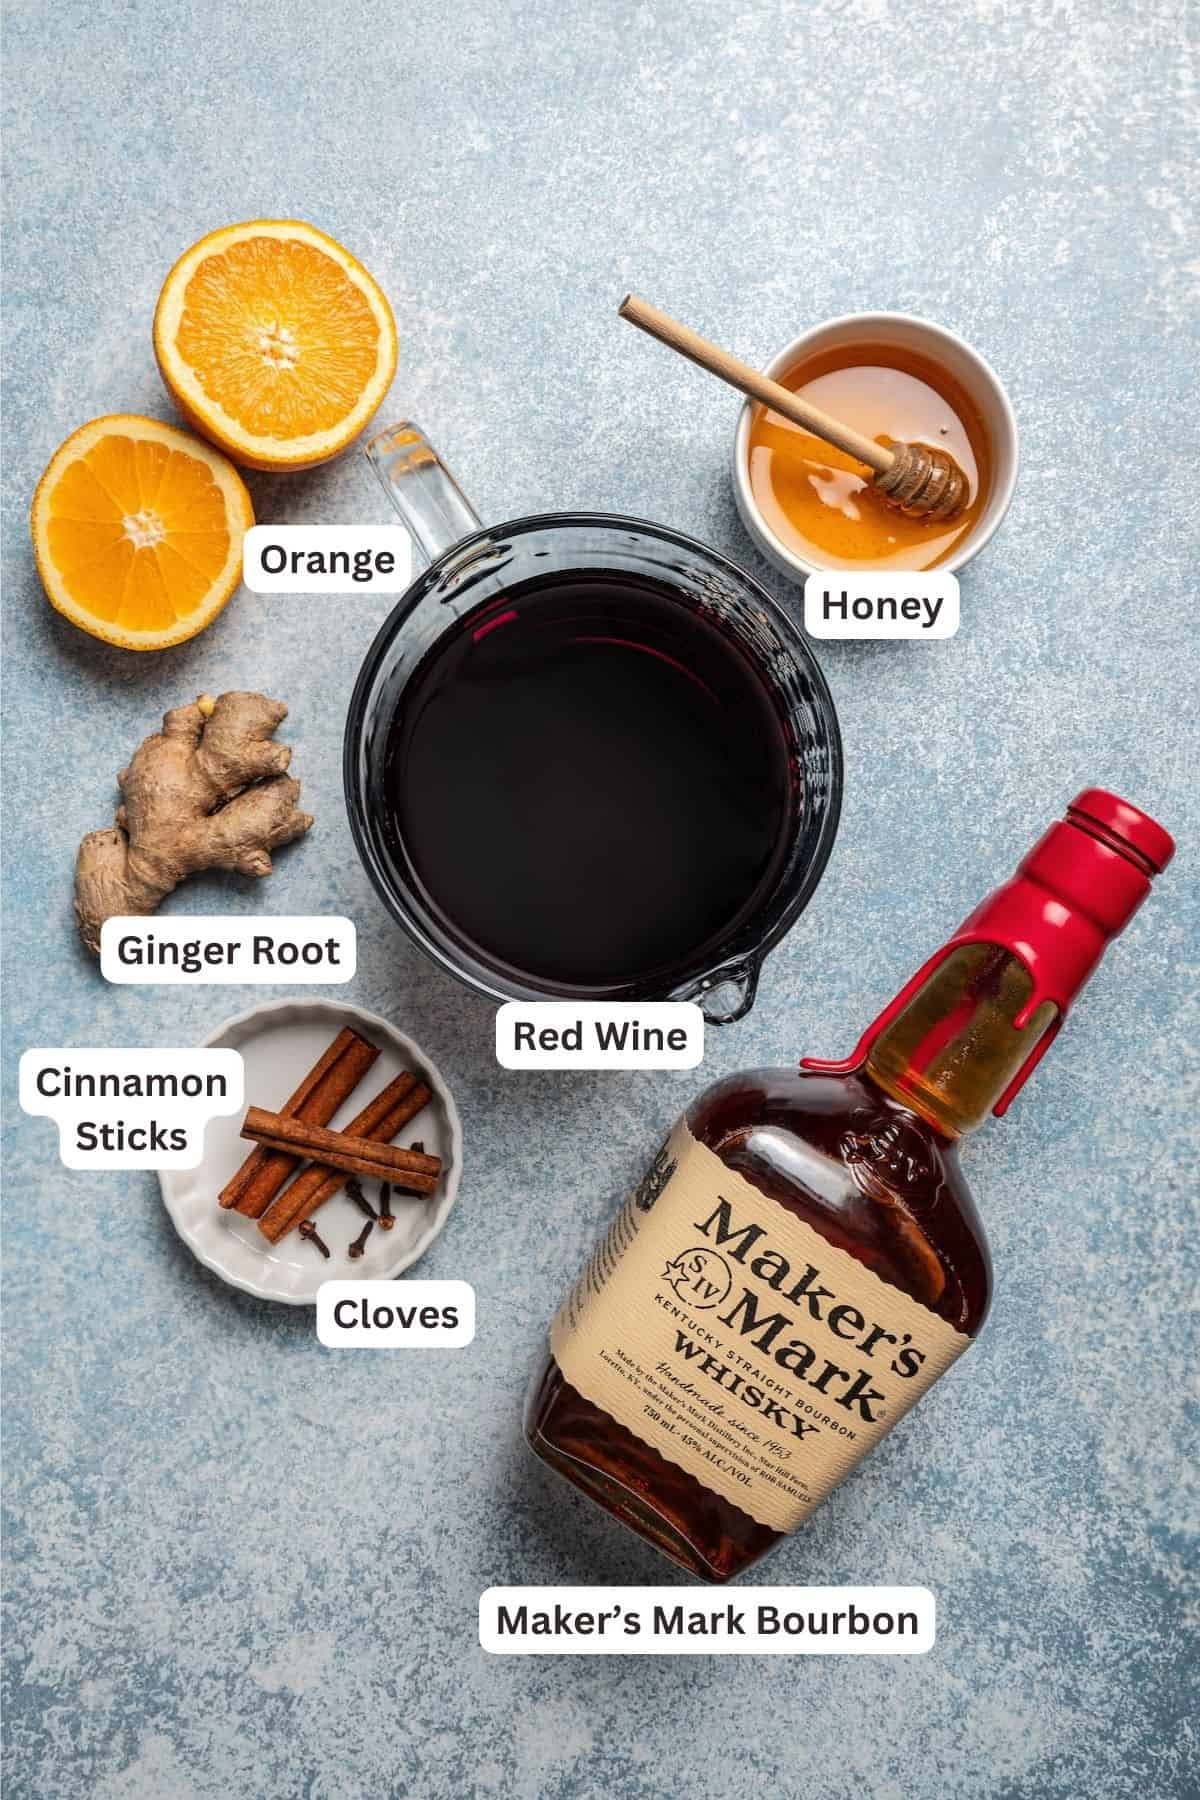 Ingredients for Mulled Wine Recipe.